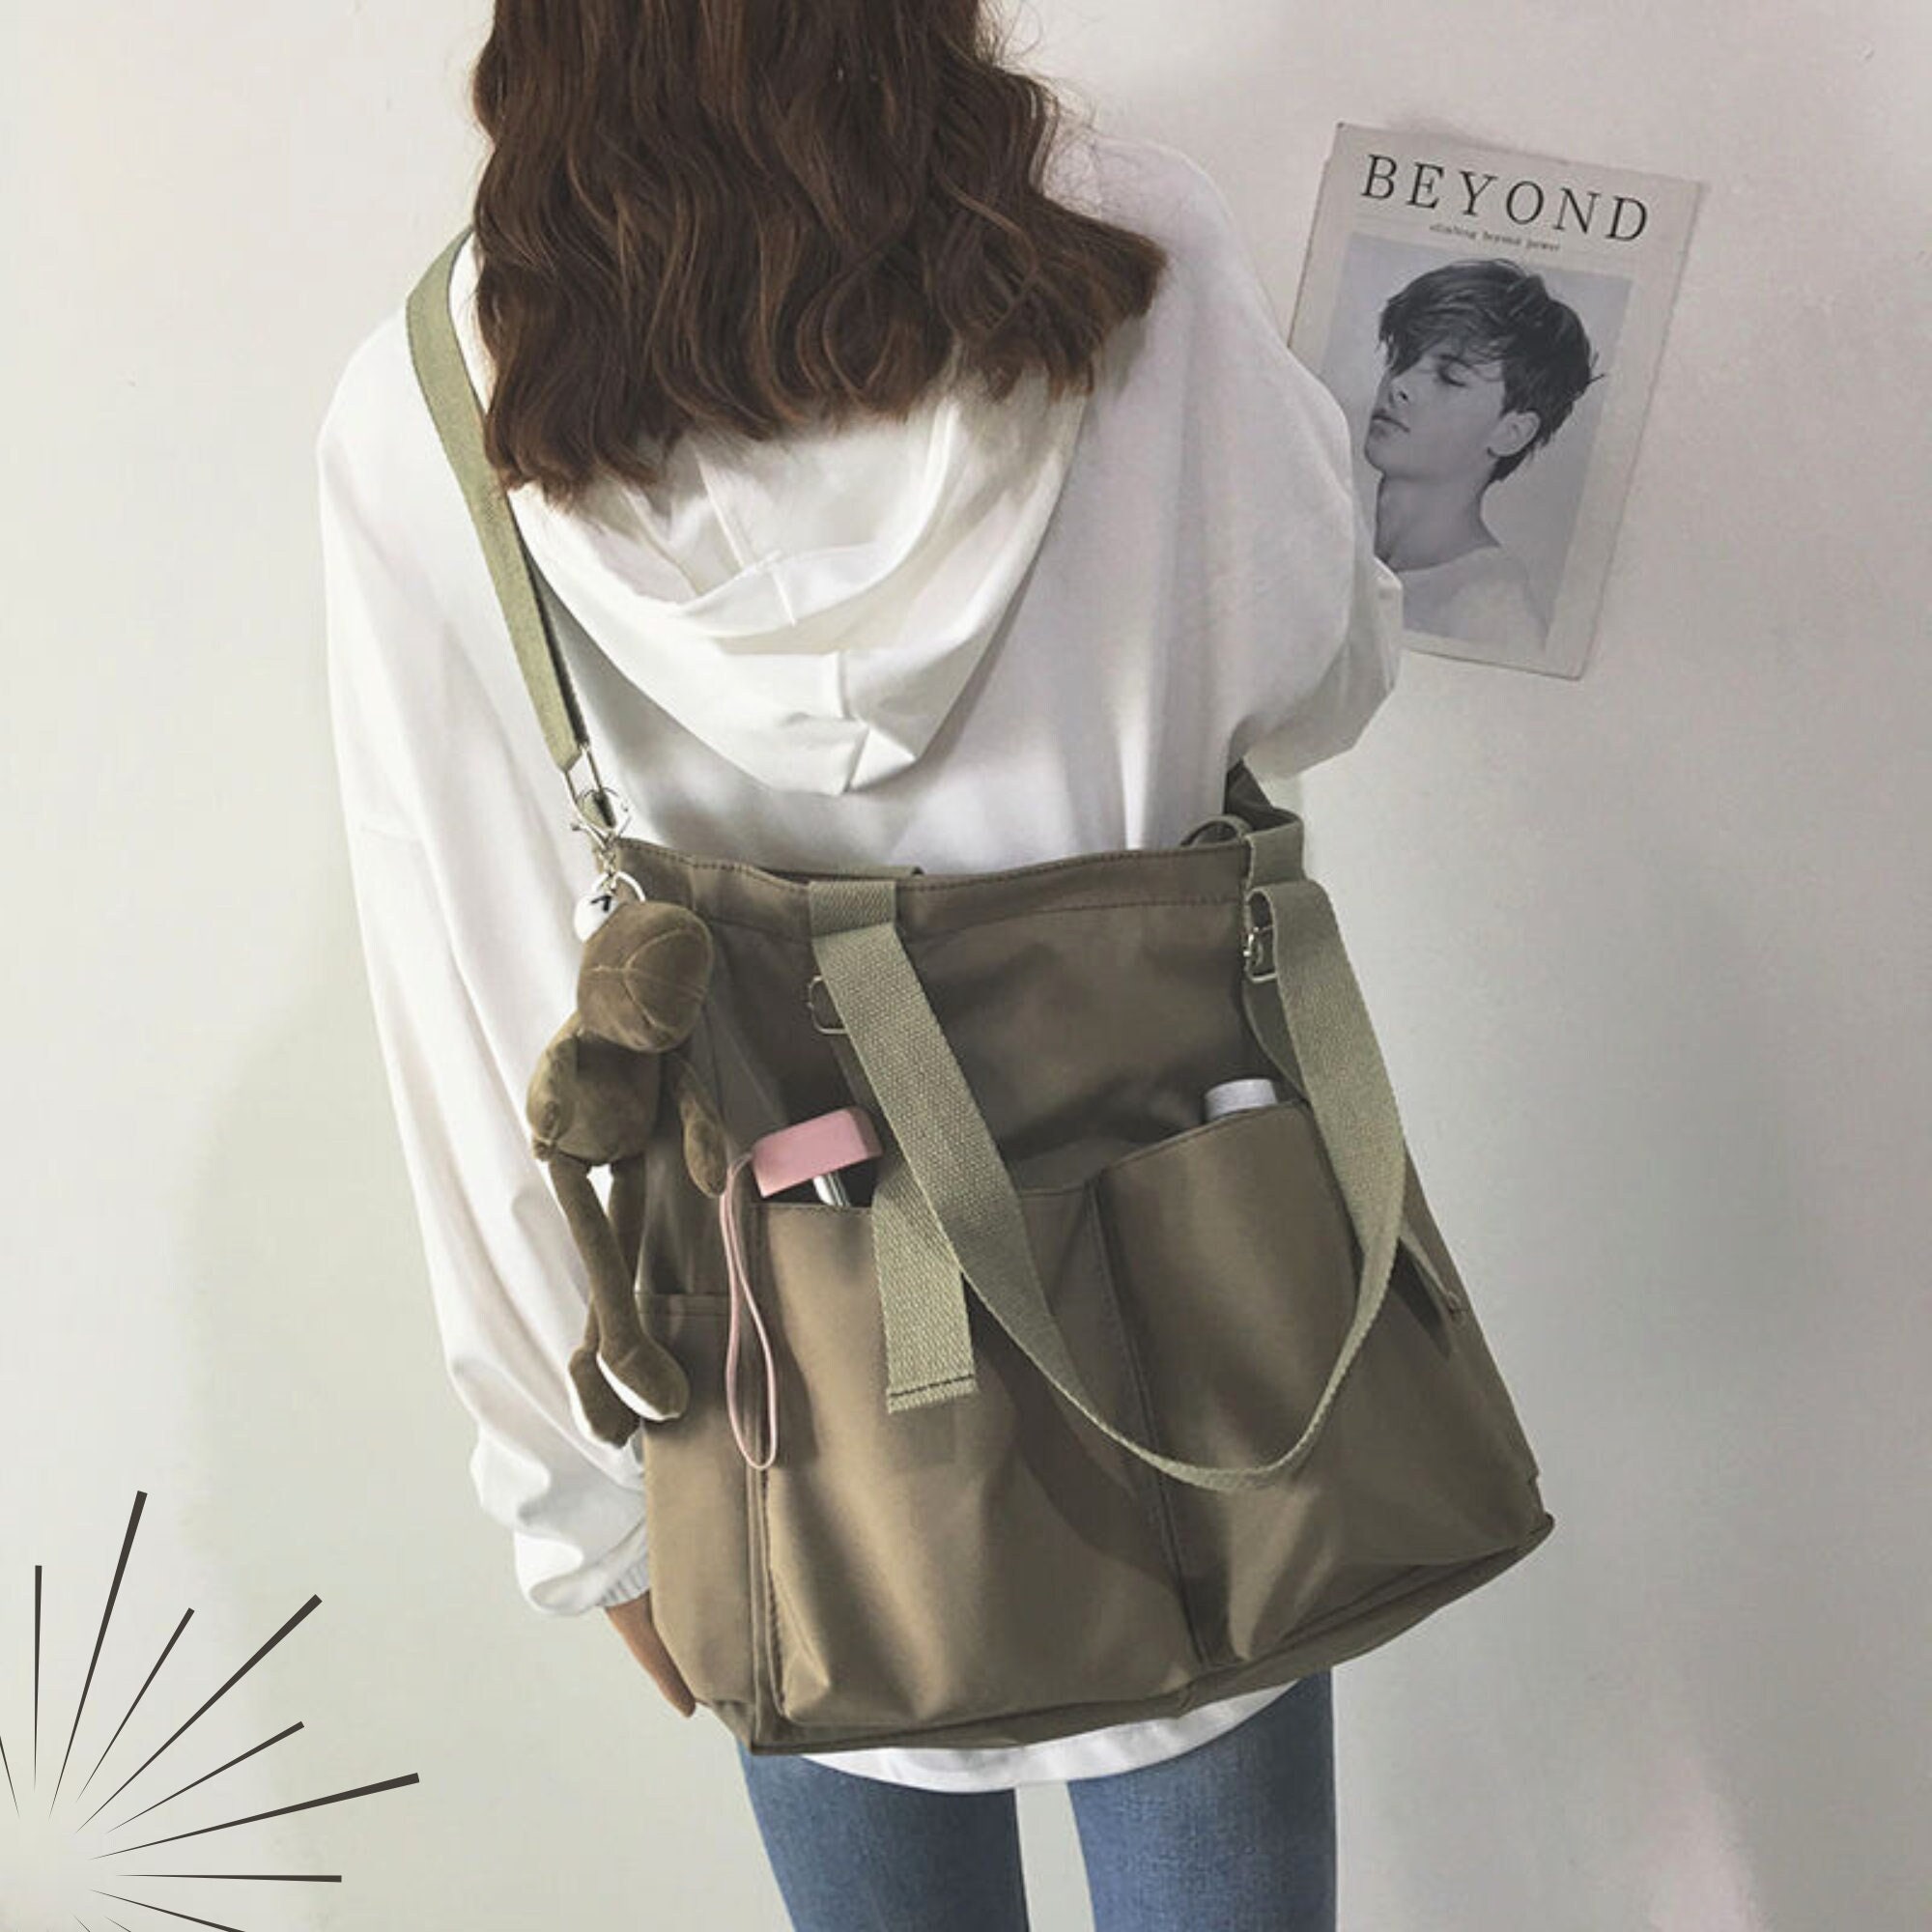 Butterfly Print Shoulder Bags Female Shopping Tote Black Canvas Foldable  Reusable Casual Student Portable School Handbag Trendy - Shoulder Bags -  AliExpress